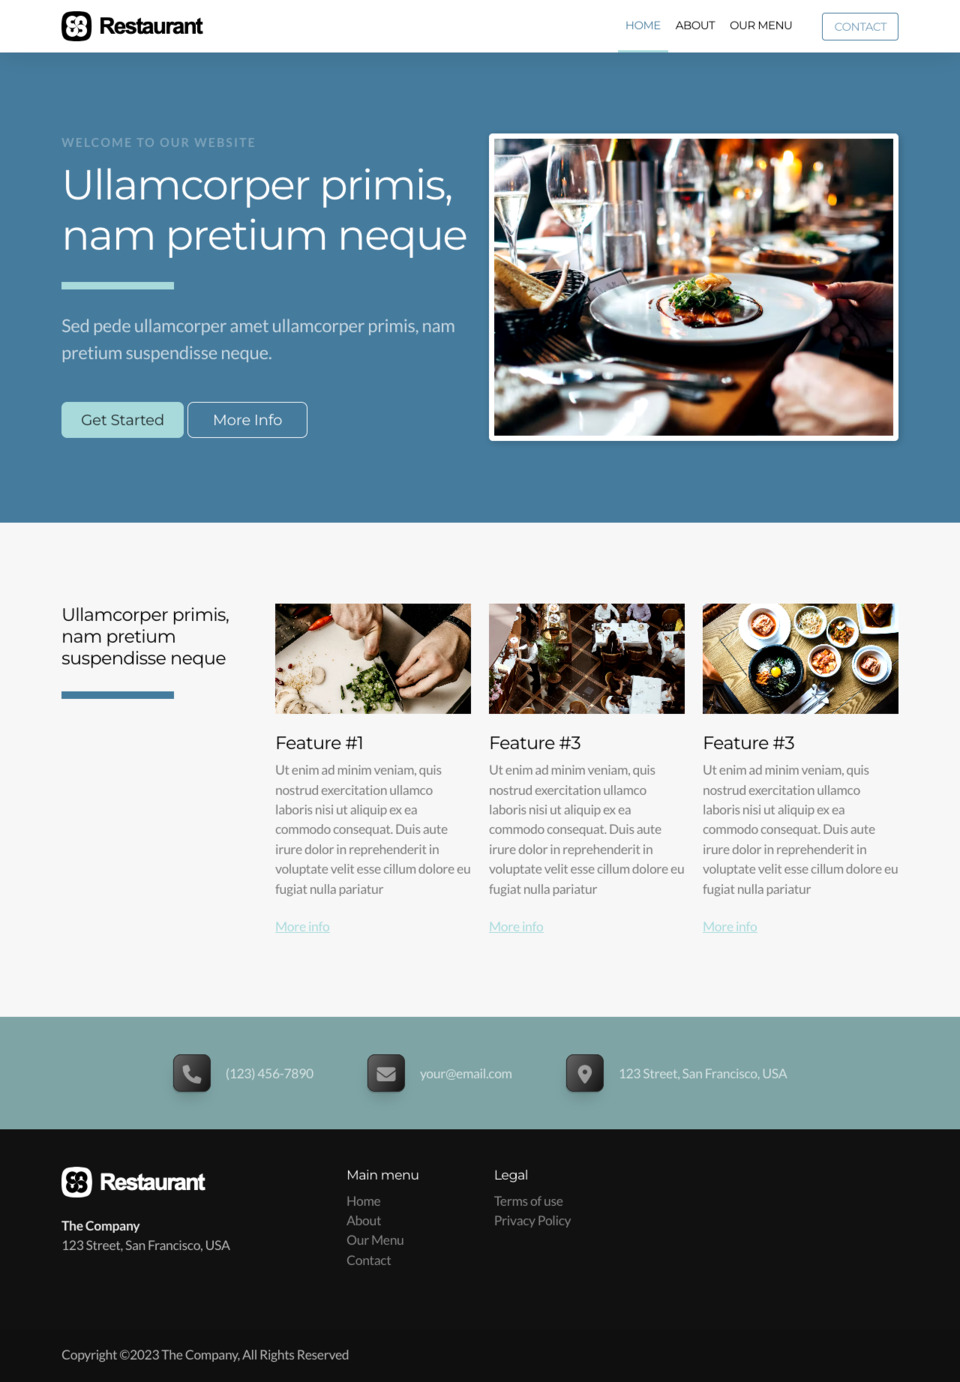 Restaurant Website Template - Ideal for restaurant owners, food bloggers, catering services, local diners, and anyone looking to showcase their culinary offerings online.